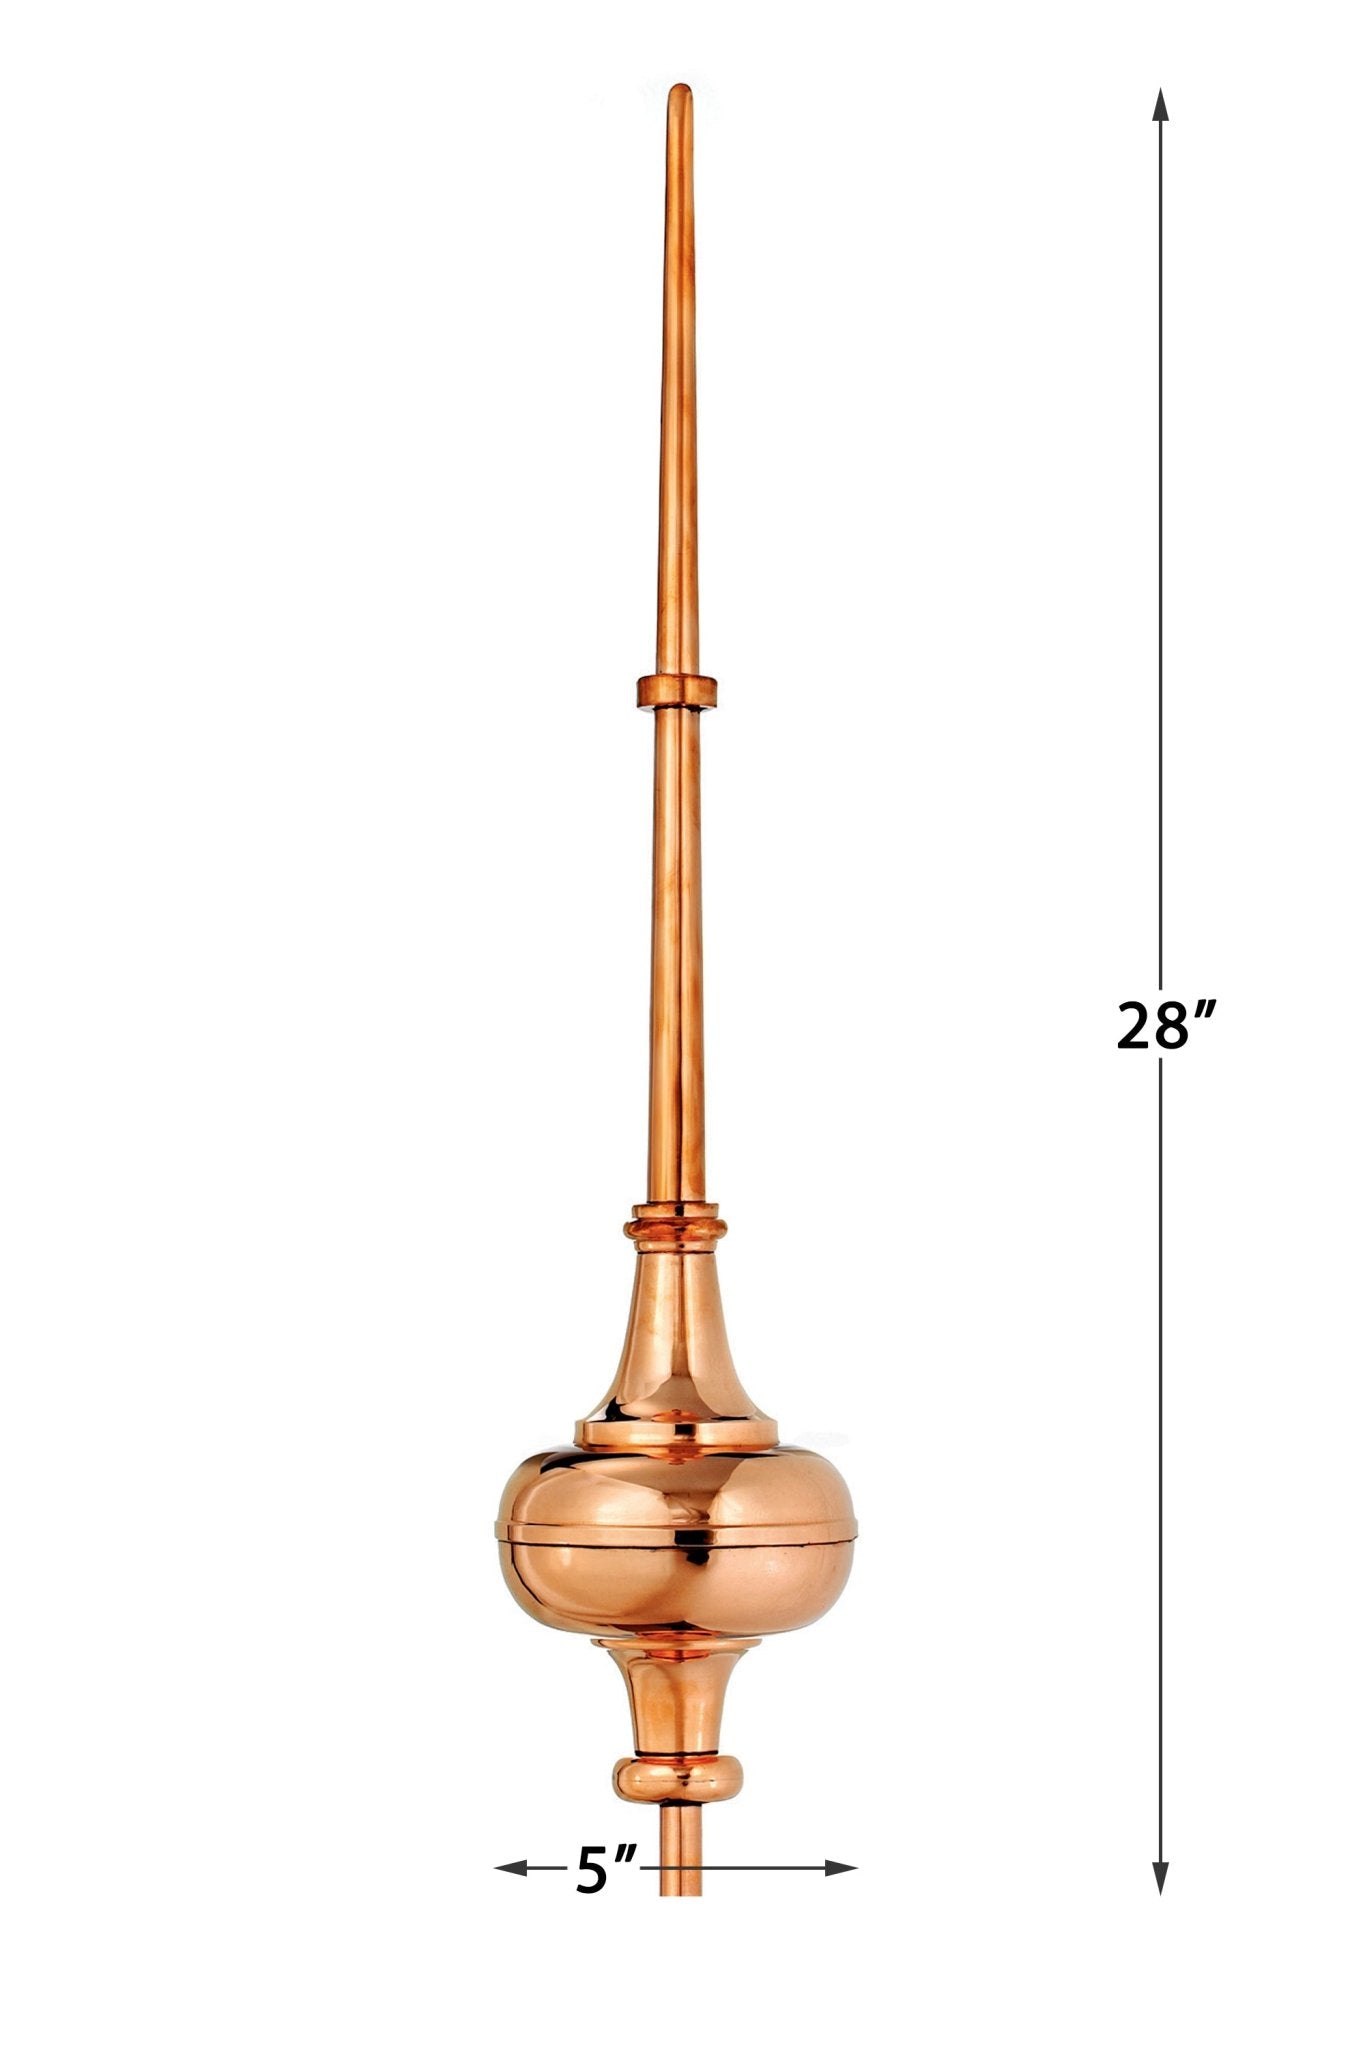 28" Morgana Rooftop Finial - Good Directions